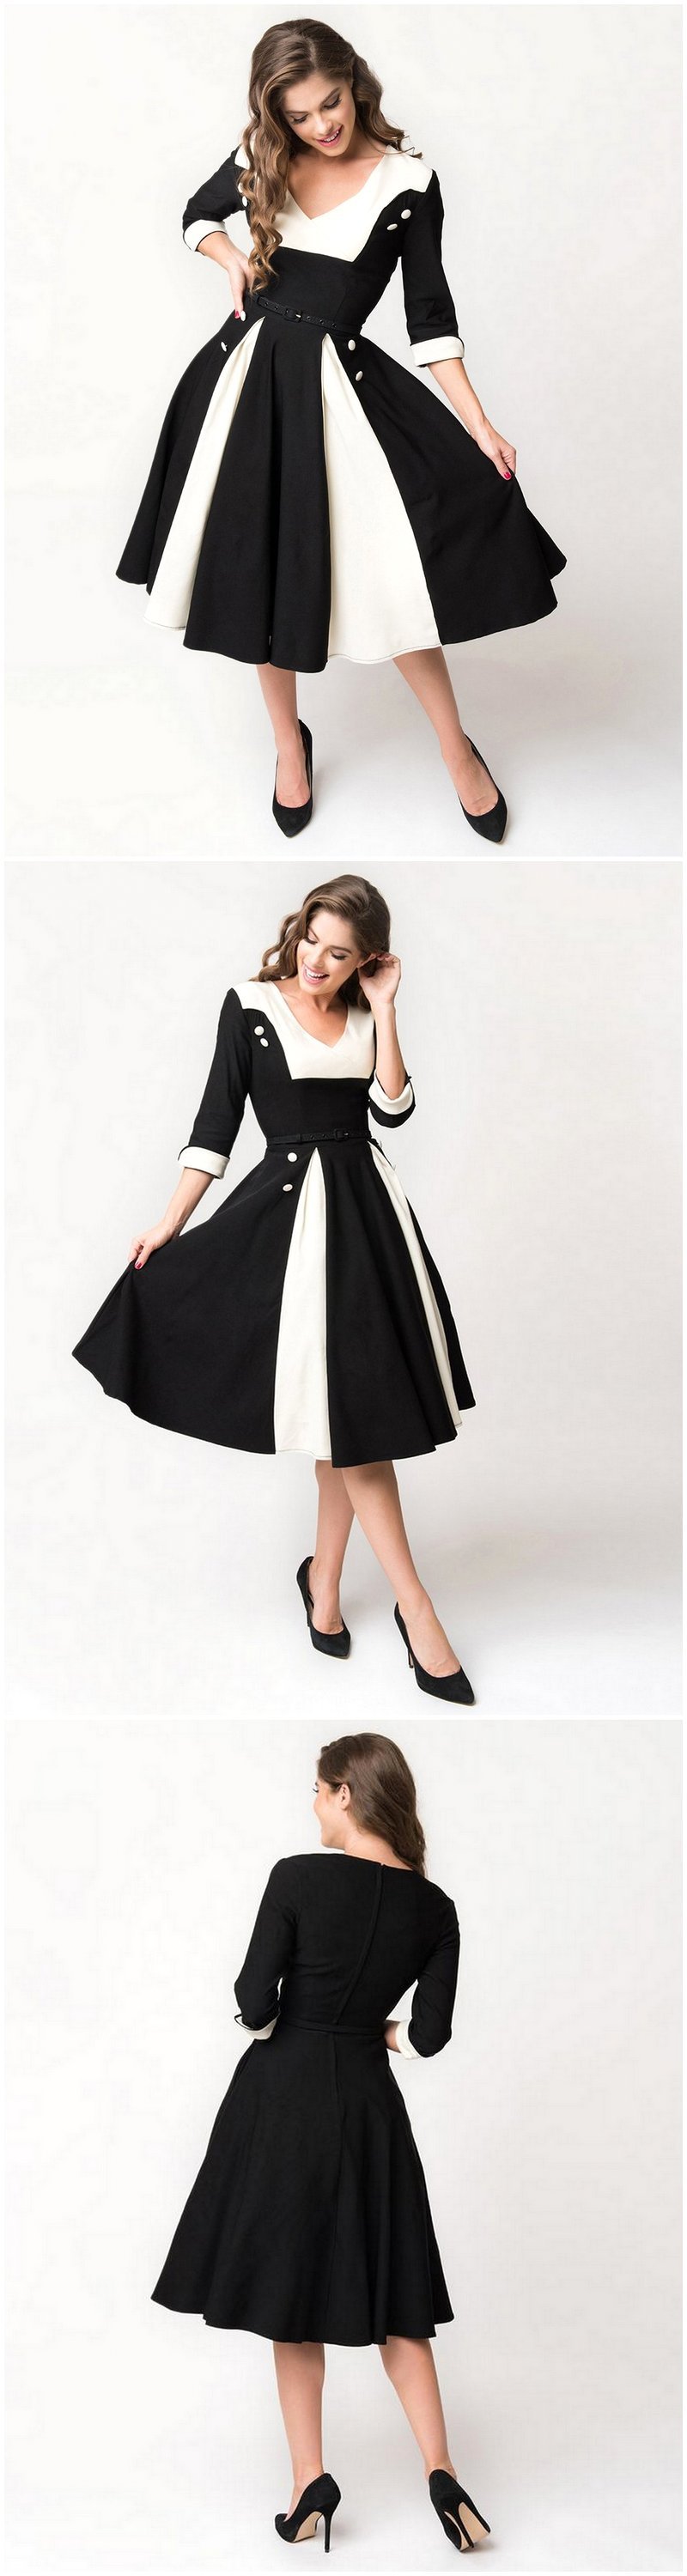 Retro Style Vintage Inspired Clothing for Women  Retro Vintage Style  Fashion and Living Styles.